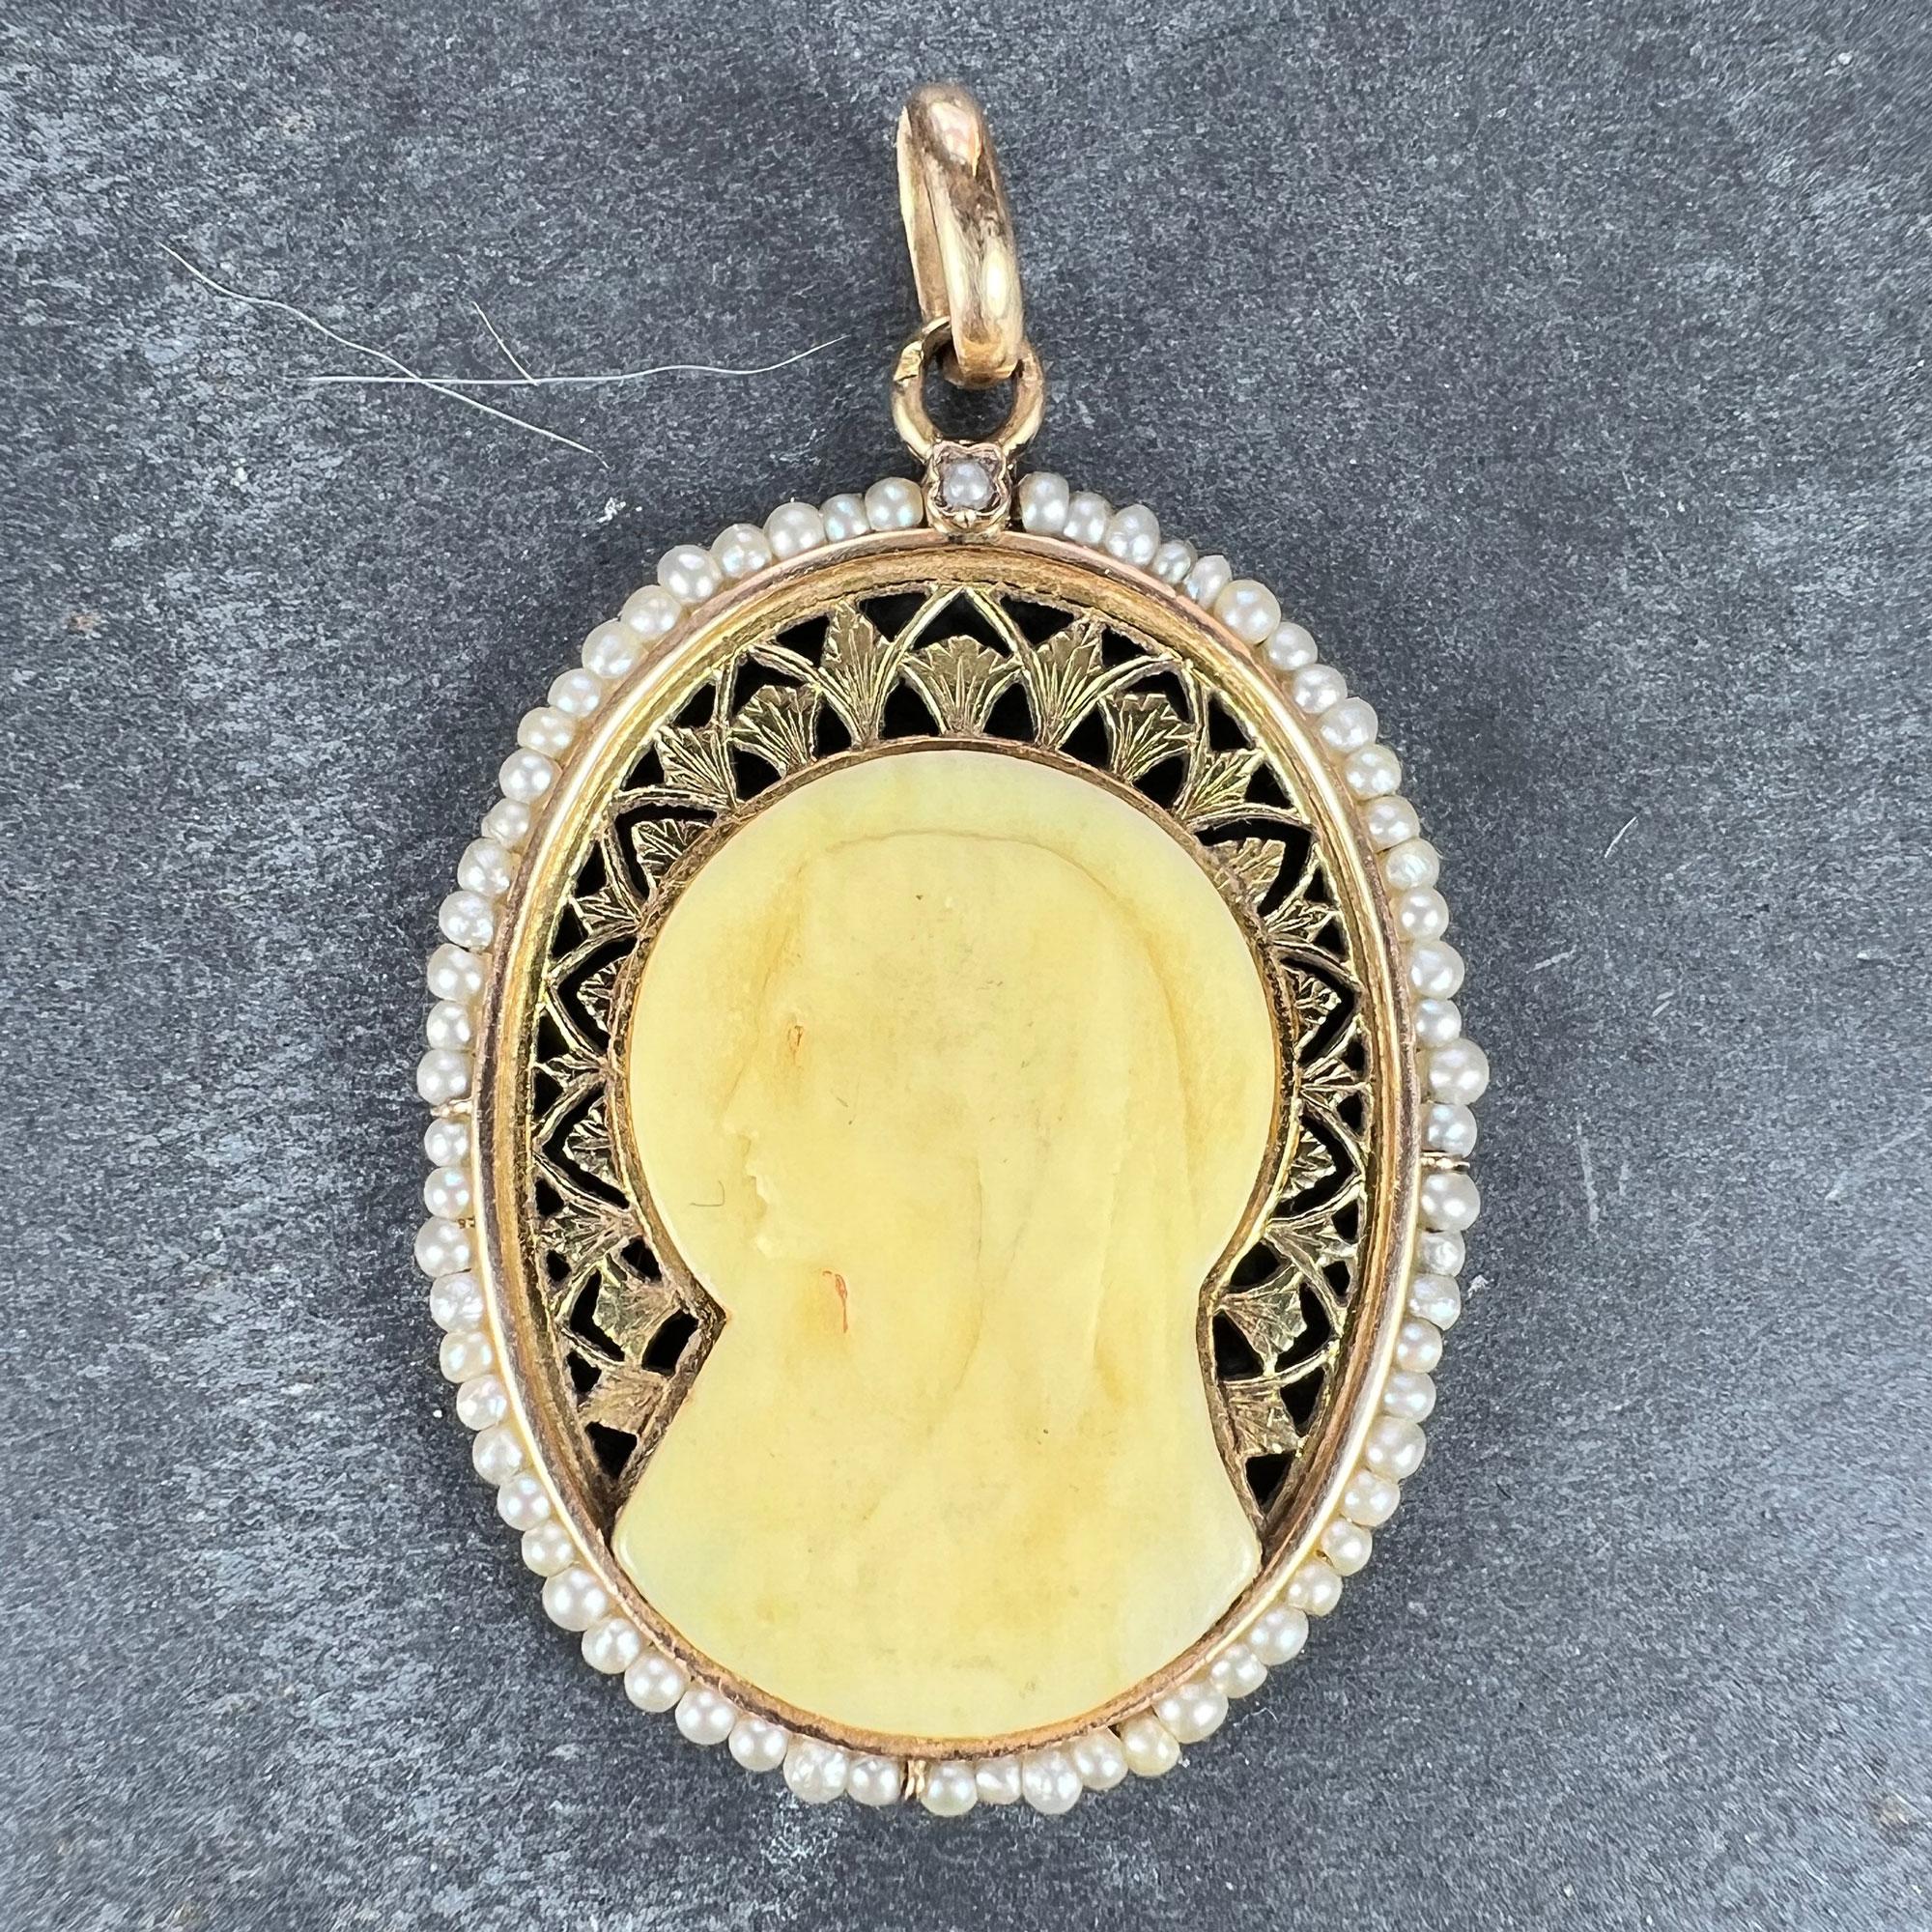 A French 18 karat (18K) yellow gold charm pendant designed as an oval representing the Virgin Mary as a Bakelite cameo set in a pierced frame, surrounded by 66 natural white seed pearls with a single seed pearl collet set to the top. Stamped with